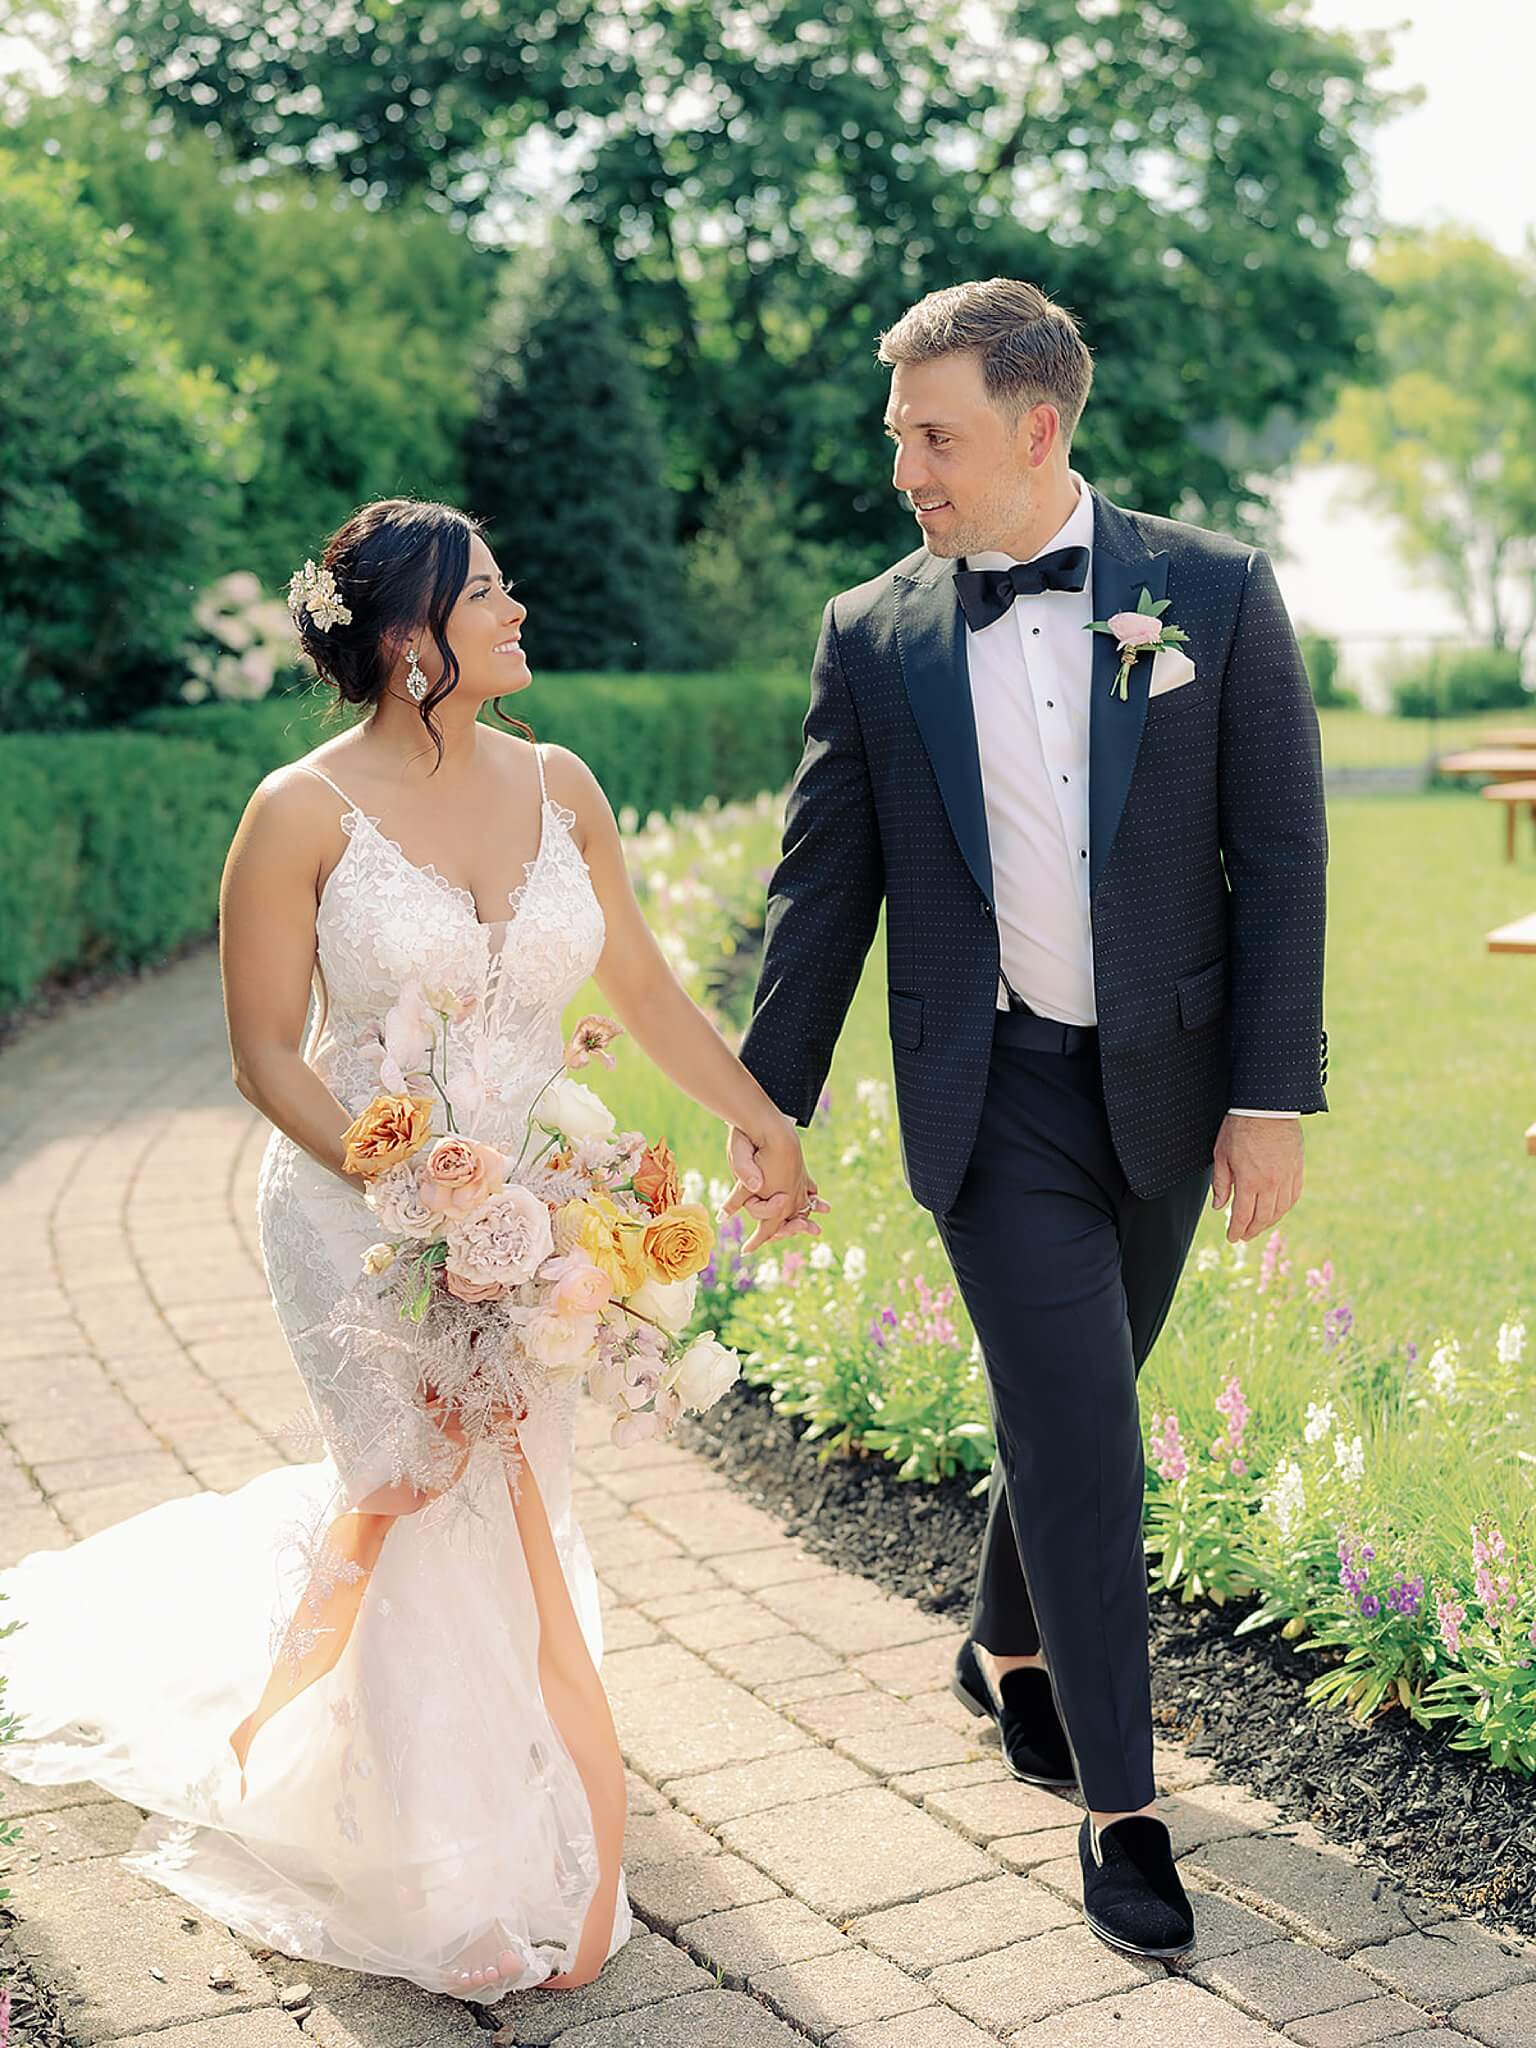 A bride and groom walking down a pathway in a garden, experiencing their wedding.